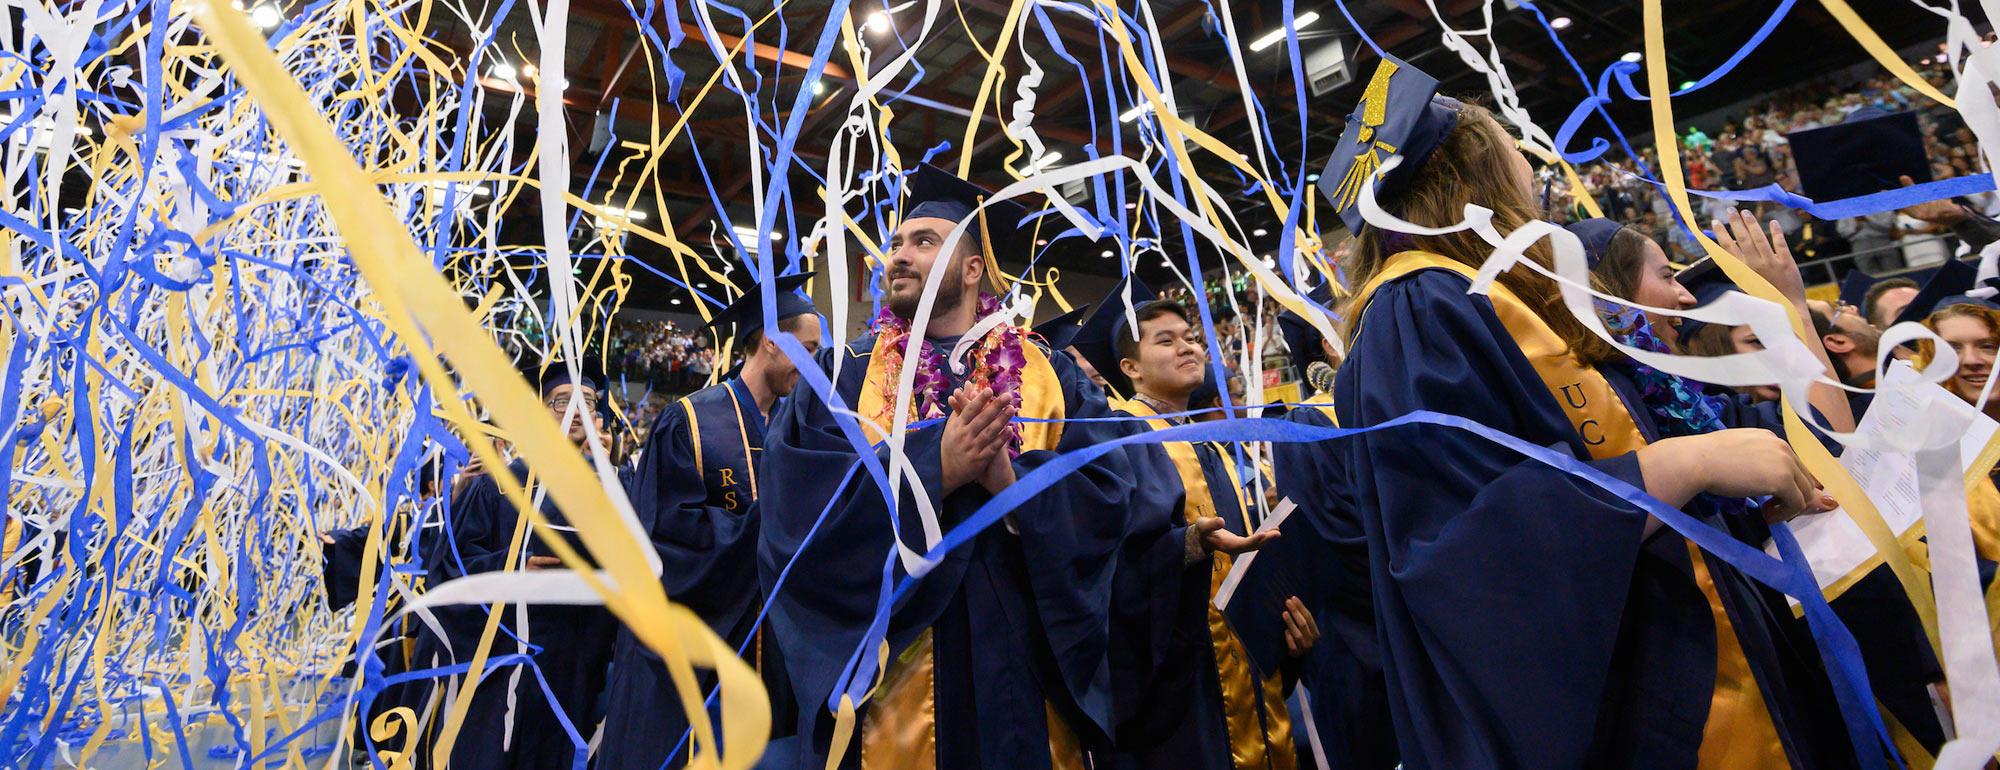 Students celebrating at commencement while streamers fall from the ceiling